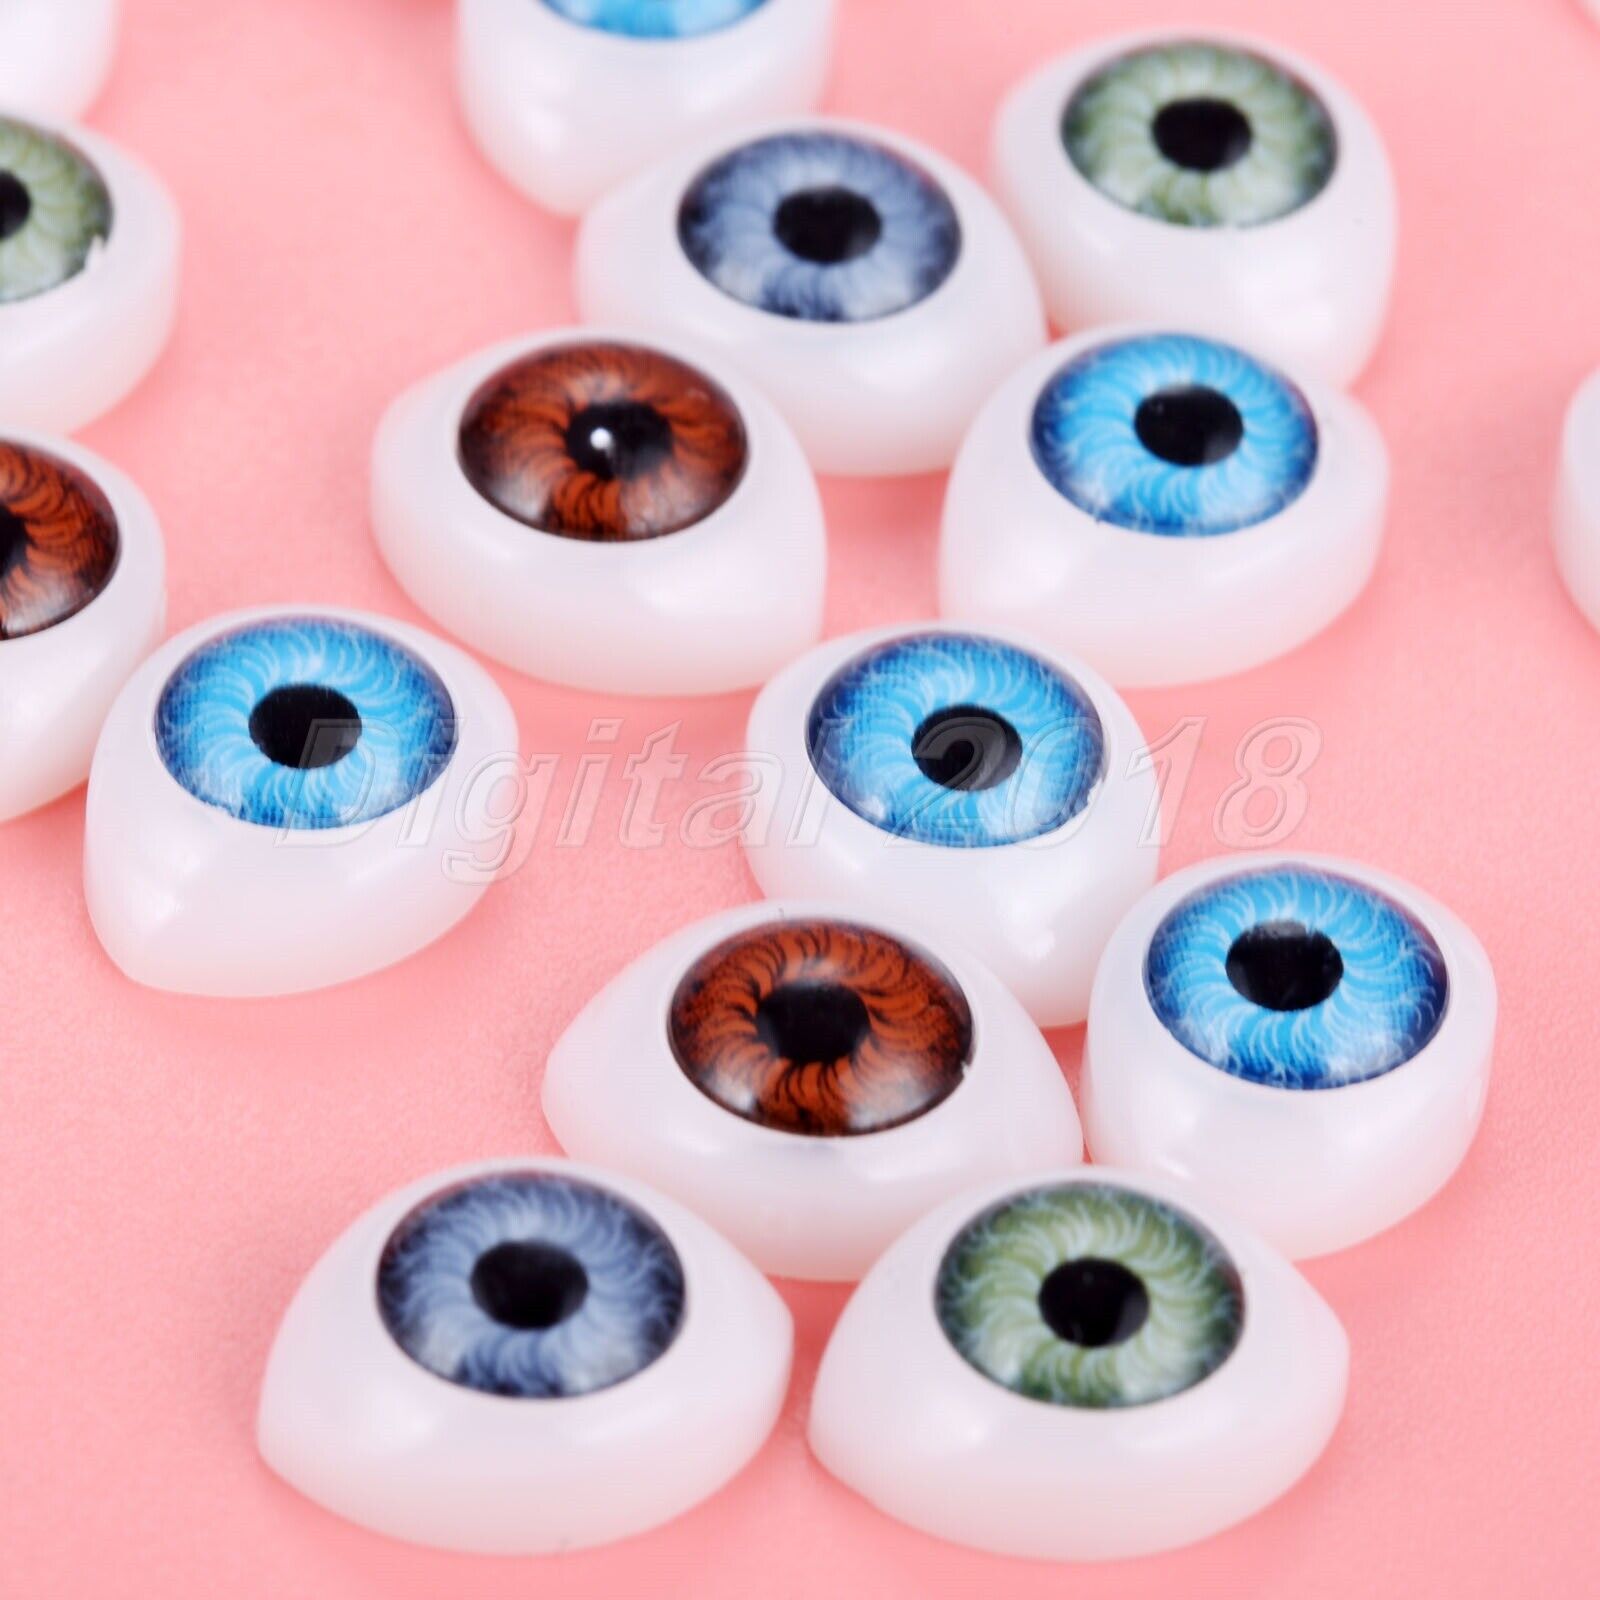 100Pcs 0.47"*0.63" Safety Doll Eyes Toys For Doll Making Eyes Doll Accessories Unbranded Does Not Apply - фотография #10